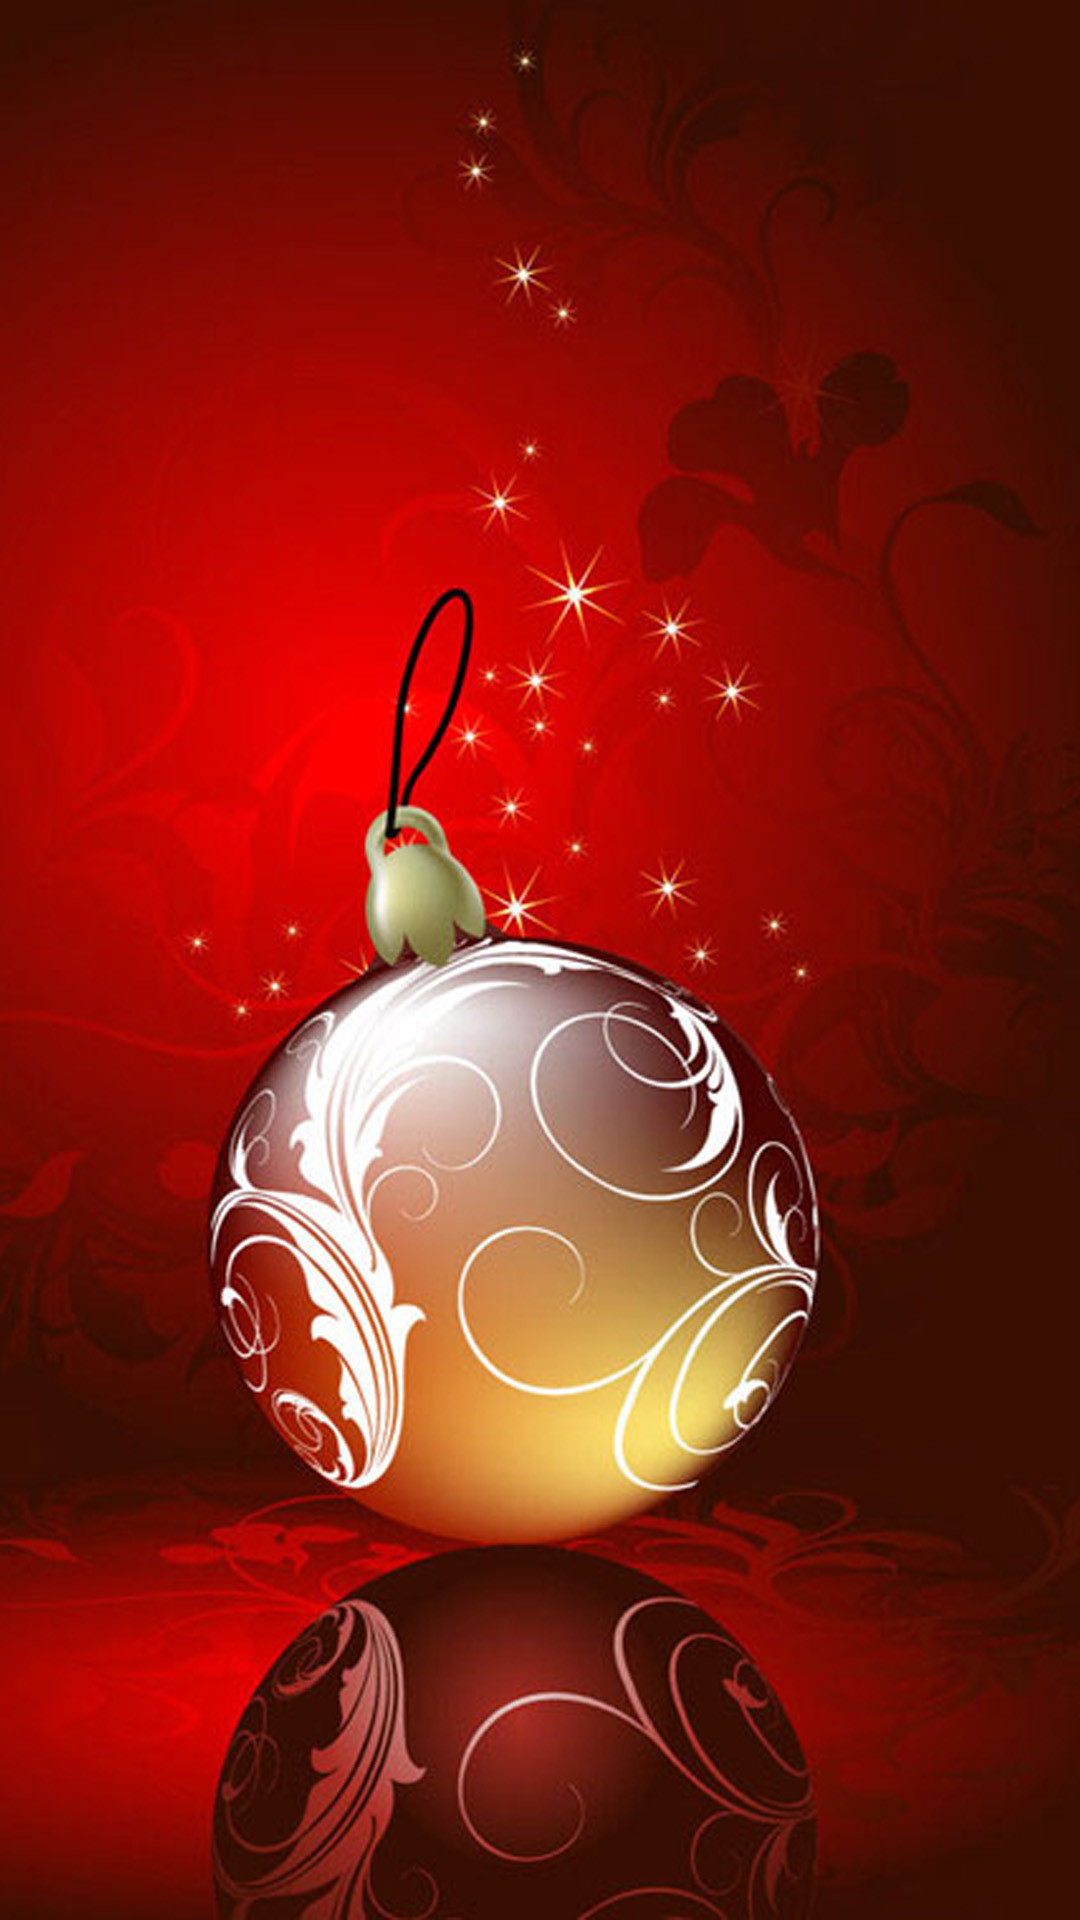 1080x1920 ... christmas hd galaxy note 3 wallpapers part 3 ...